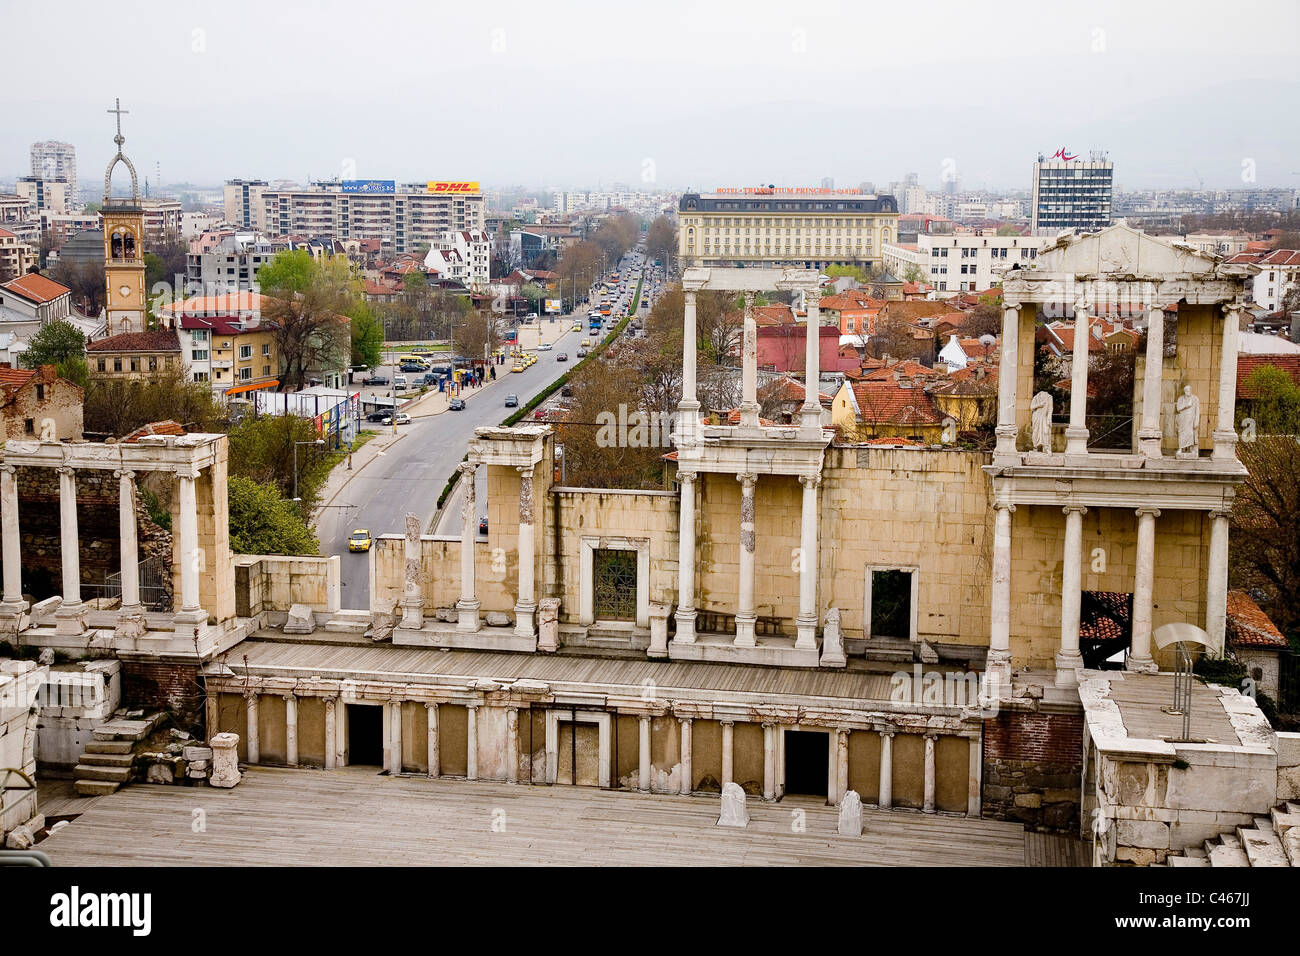 Photograph of the ancient Roman Amphitheater in the modern city of Plovdiv in Bulgaria Stock Photo